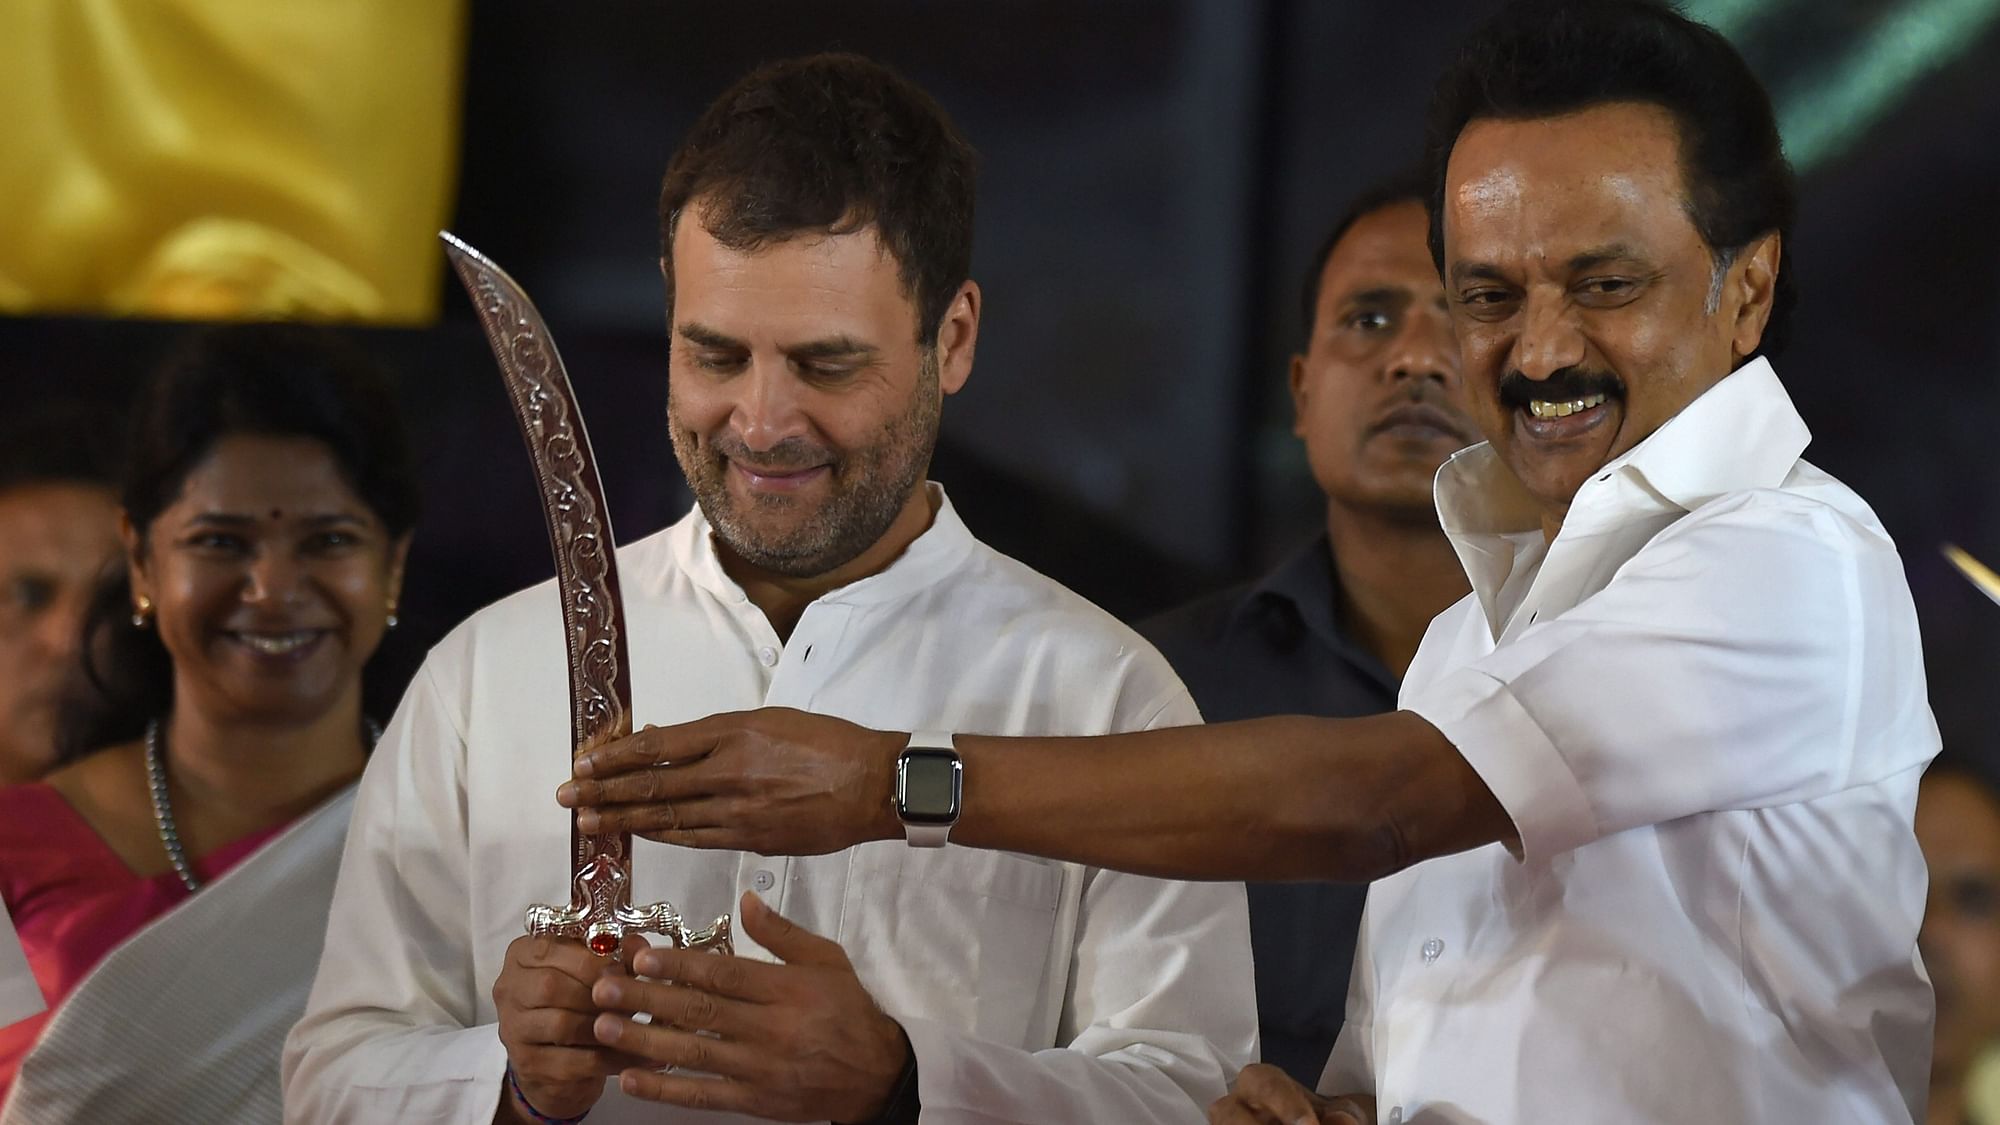  Congress President Rahul Gandhi is being presented a sword by DMK President MK Stalin at a public meeting after unveiling a life-size bronze statue of late Chief Minister and DMK President M Karunanidhi at YMCA ground.